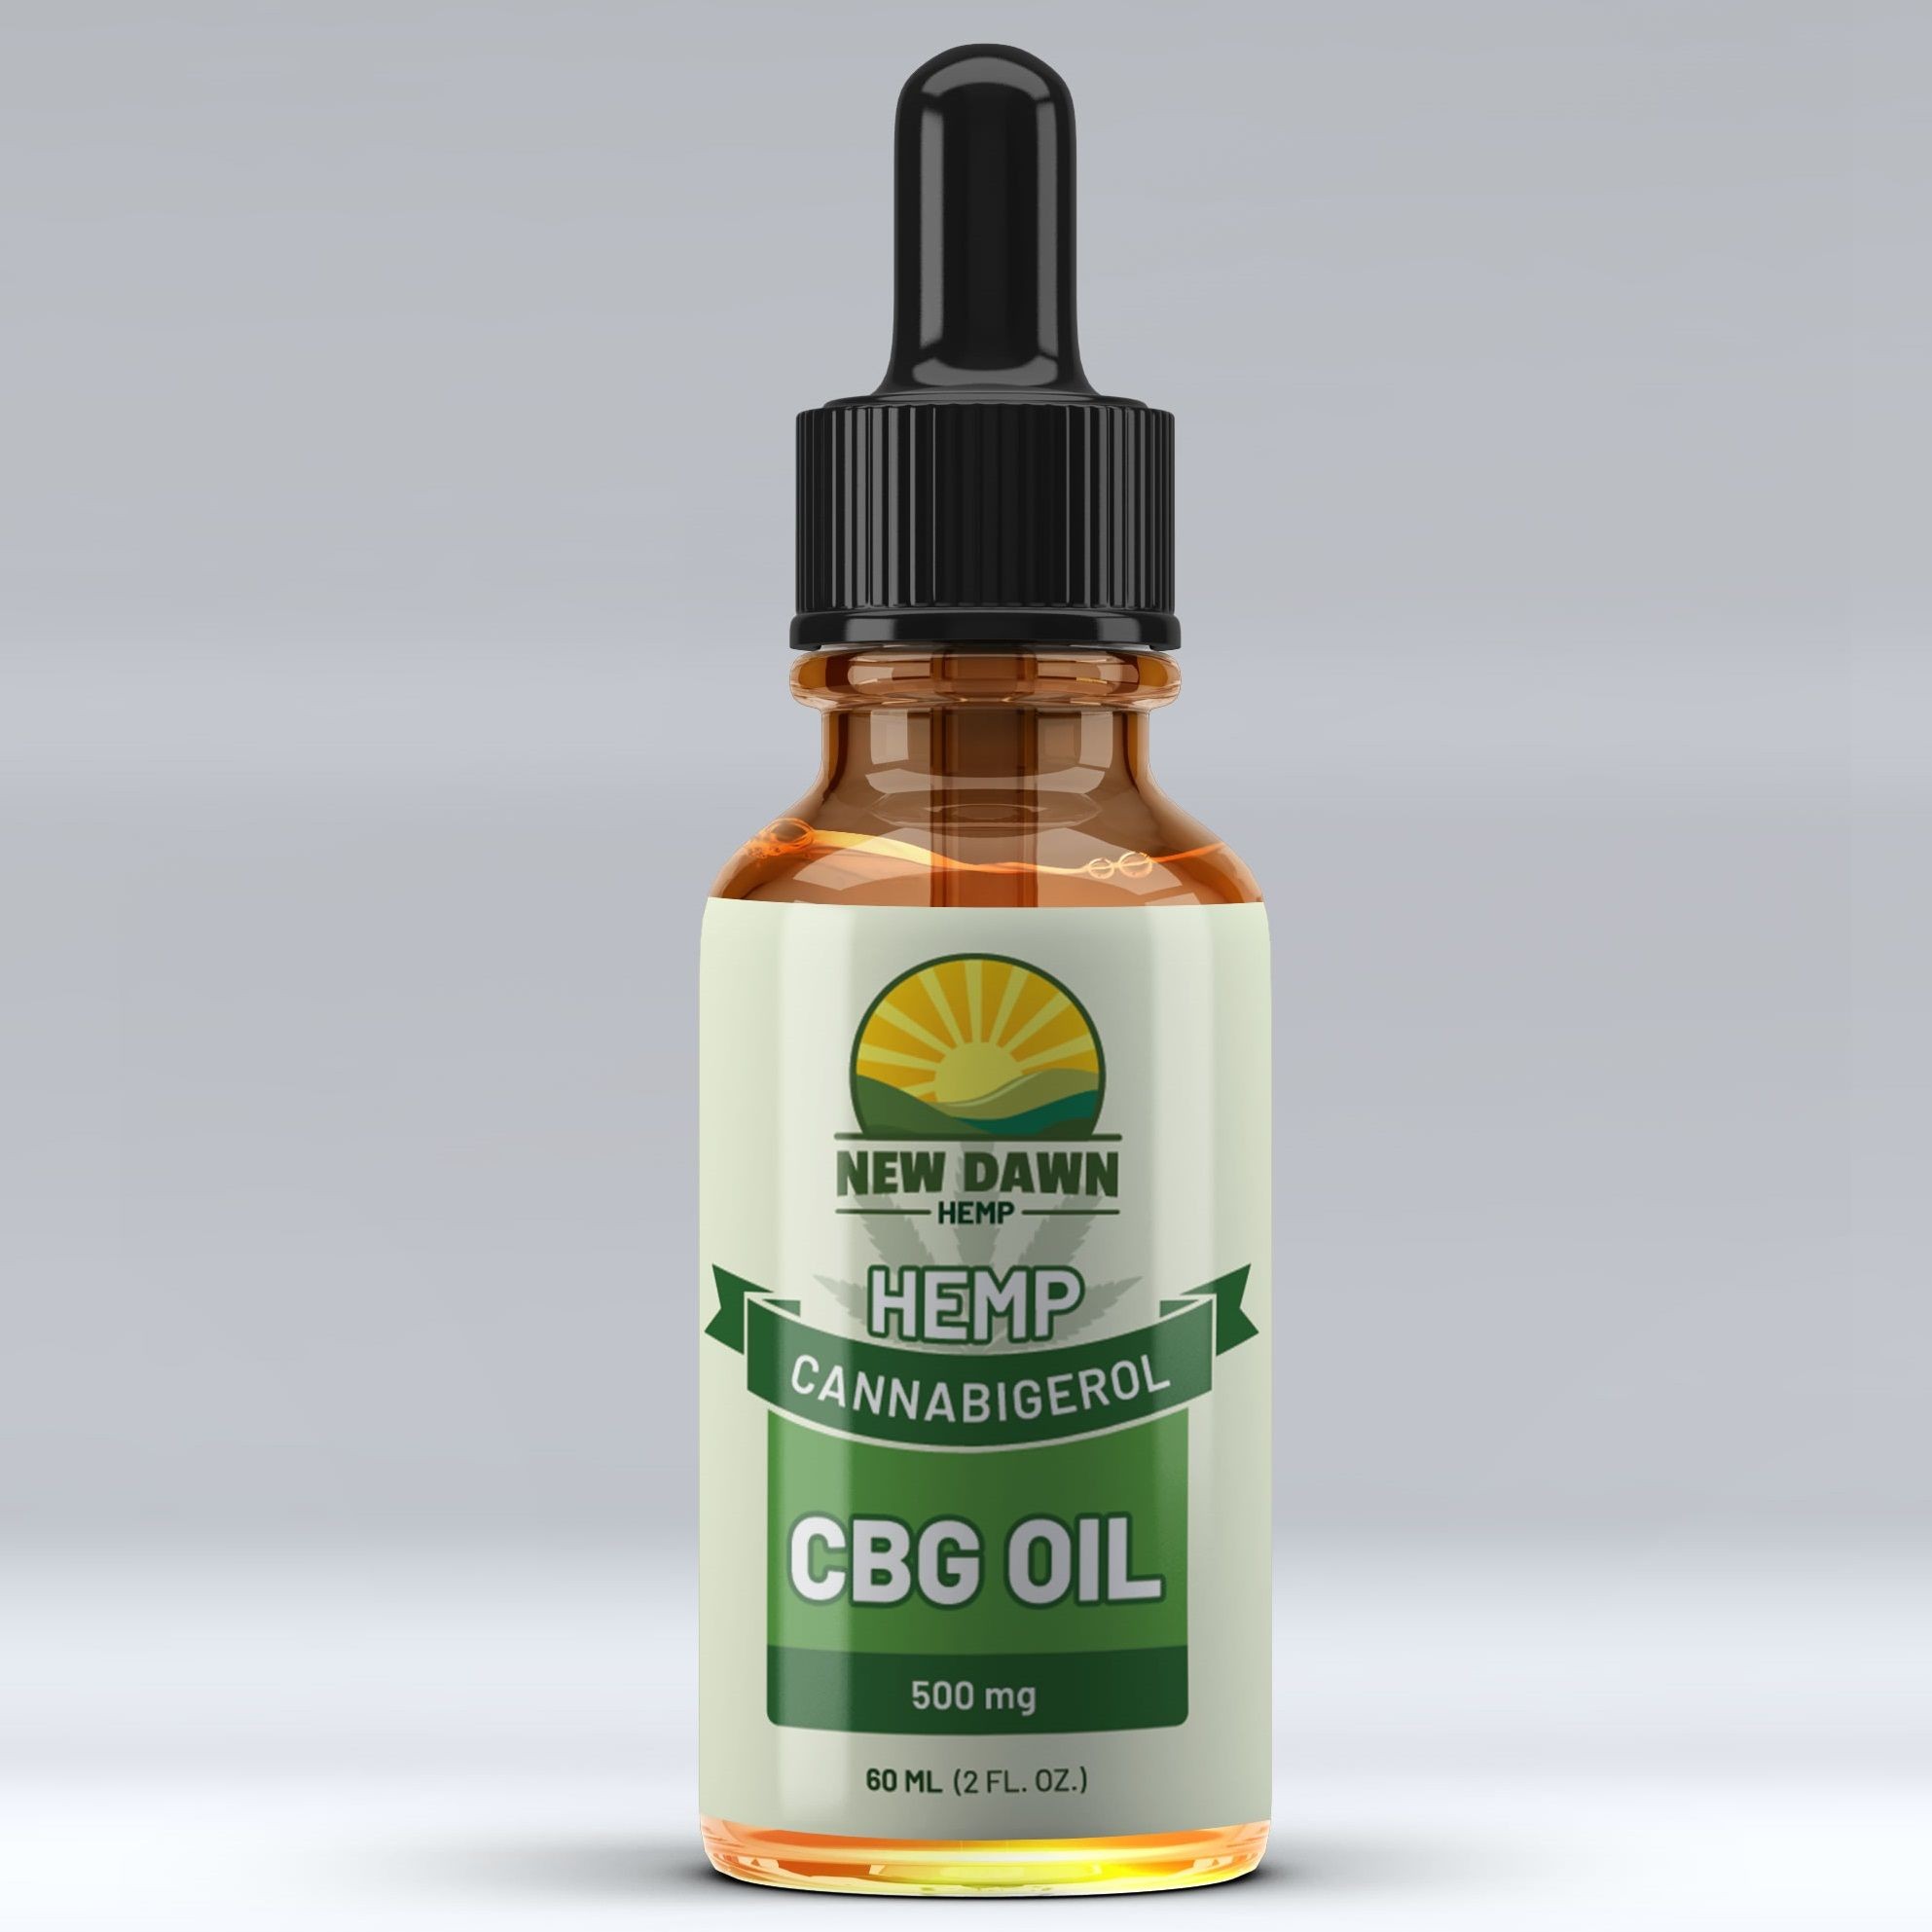 Myriams Premium Hemp Products Cbg Oil - Cbg|Gummies|Cbd|Effects|Thc|Cannabinoid|Hemp|Cannabinoids|Image|Products|Courtesy|Product|Way|Benefits|Dosage|Everyone|Oil|People|Spectrum|Others|Gummy|Time|Dosages|Advantages|Cannabis|Results|Treatment|Body|Stomach|Tincture|Pain|Drug|Approach|Isolate|Side|Dog|Ingredients|List|State|Cannabigerol|Cbg Gummies|Psychoactive Effects|Full Spectrum Gummies|Image Courtesy|Full-Spectrum Cbd Products|Different Dosages|Right Dosage|Empty Stomach|Cbd Gummies|Cbd Isolate|Side Effects|Different Effects|Dog Cbg Gummies|Drug Test|Full-Spectrum Cbd Product|Few Things|Chronic Pain|Full-Spectrum Cbd|Psychotropic Effects|Final Thoughts|Right Dosage Everyone|Final Tips|Same Results|Cbg Ratio|Appetite Loss|Powerful Hunger Stimulant|Whereas Cbd|Thc Ratio Gummies|Dangerous Consequence|Numerous Diseases